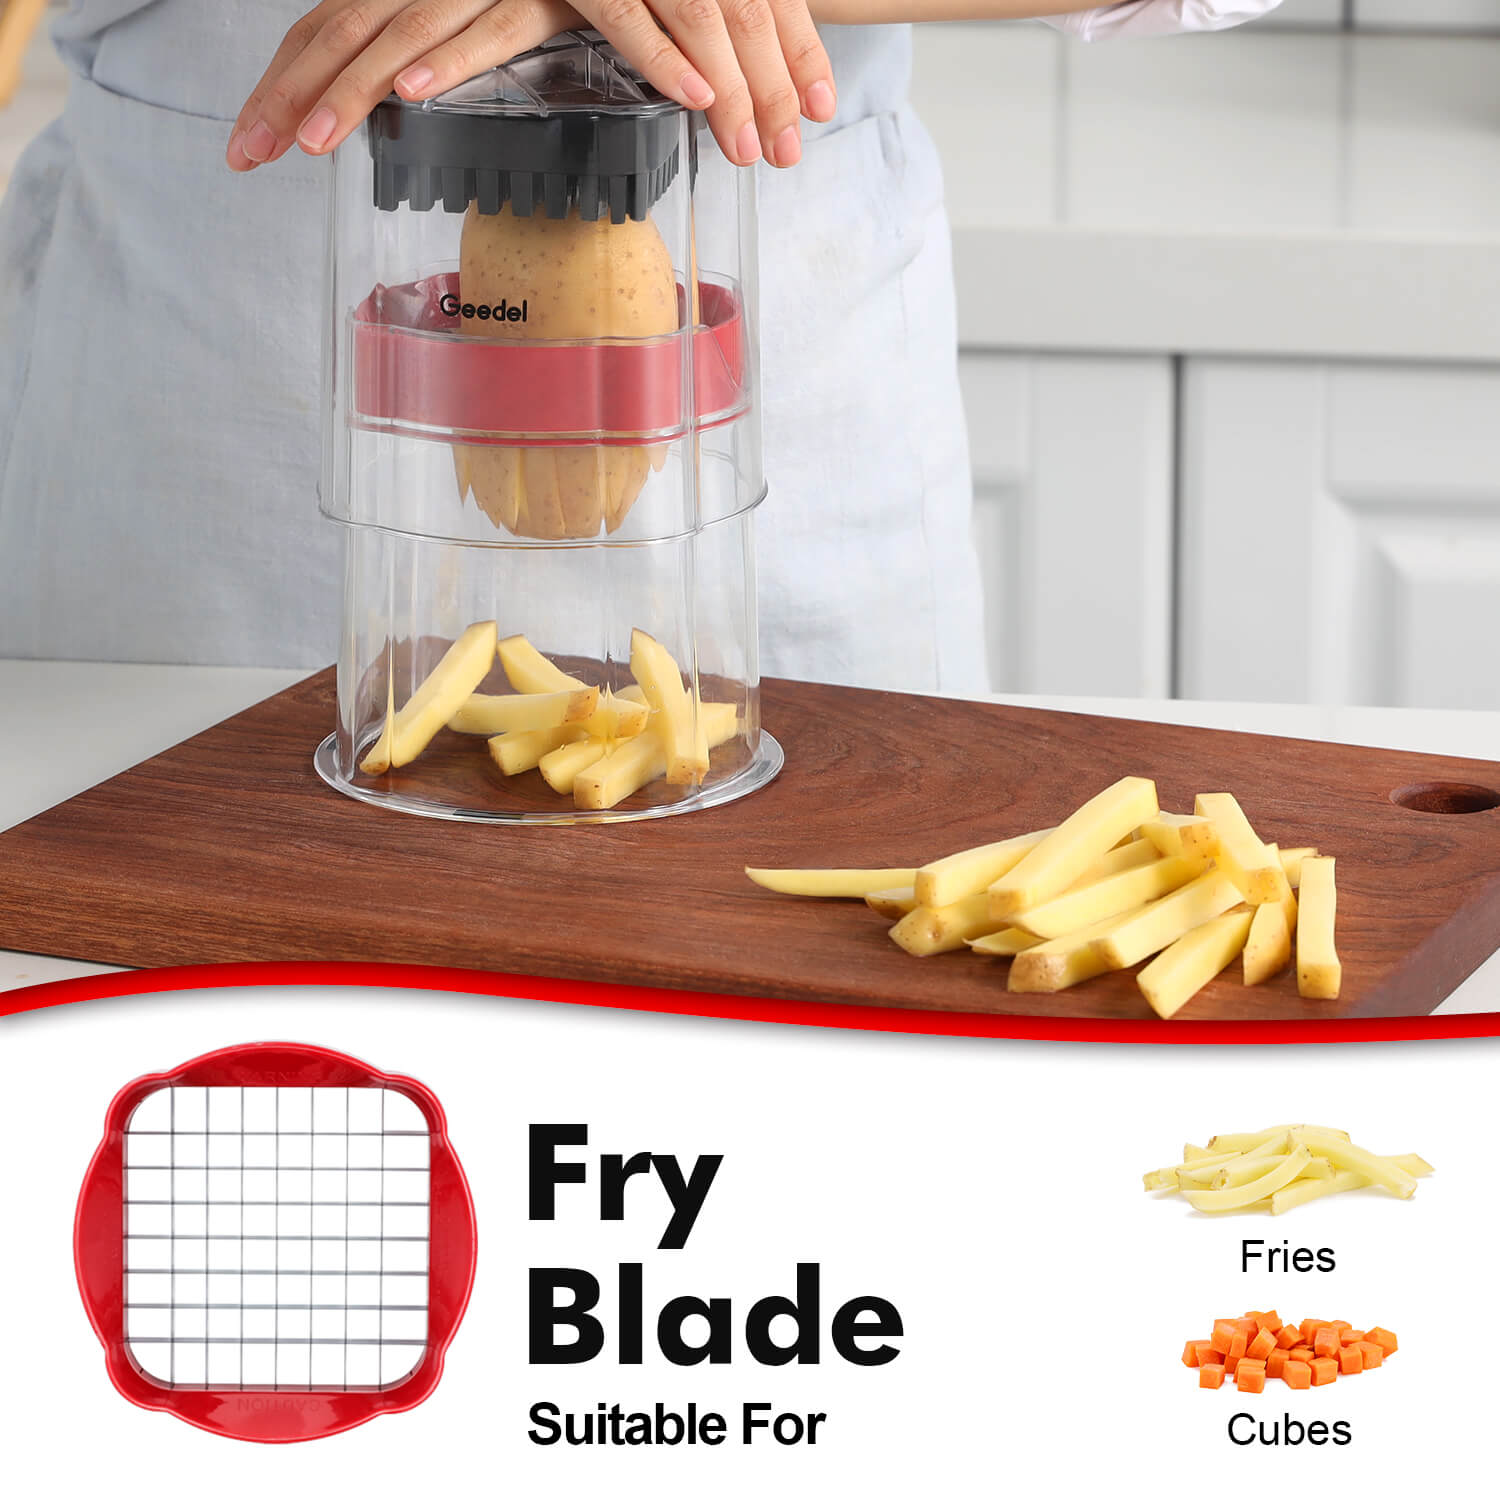 French Fry Cutter, Geedel Professional Potato Slicer Cutter for French Fries  Vegetable Chopper for Veggies, Onions, Carrots, Cucumbers and more